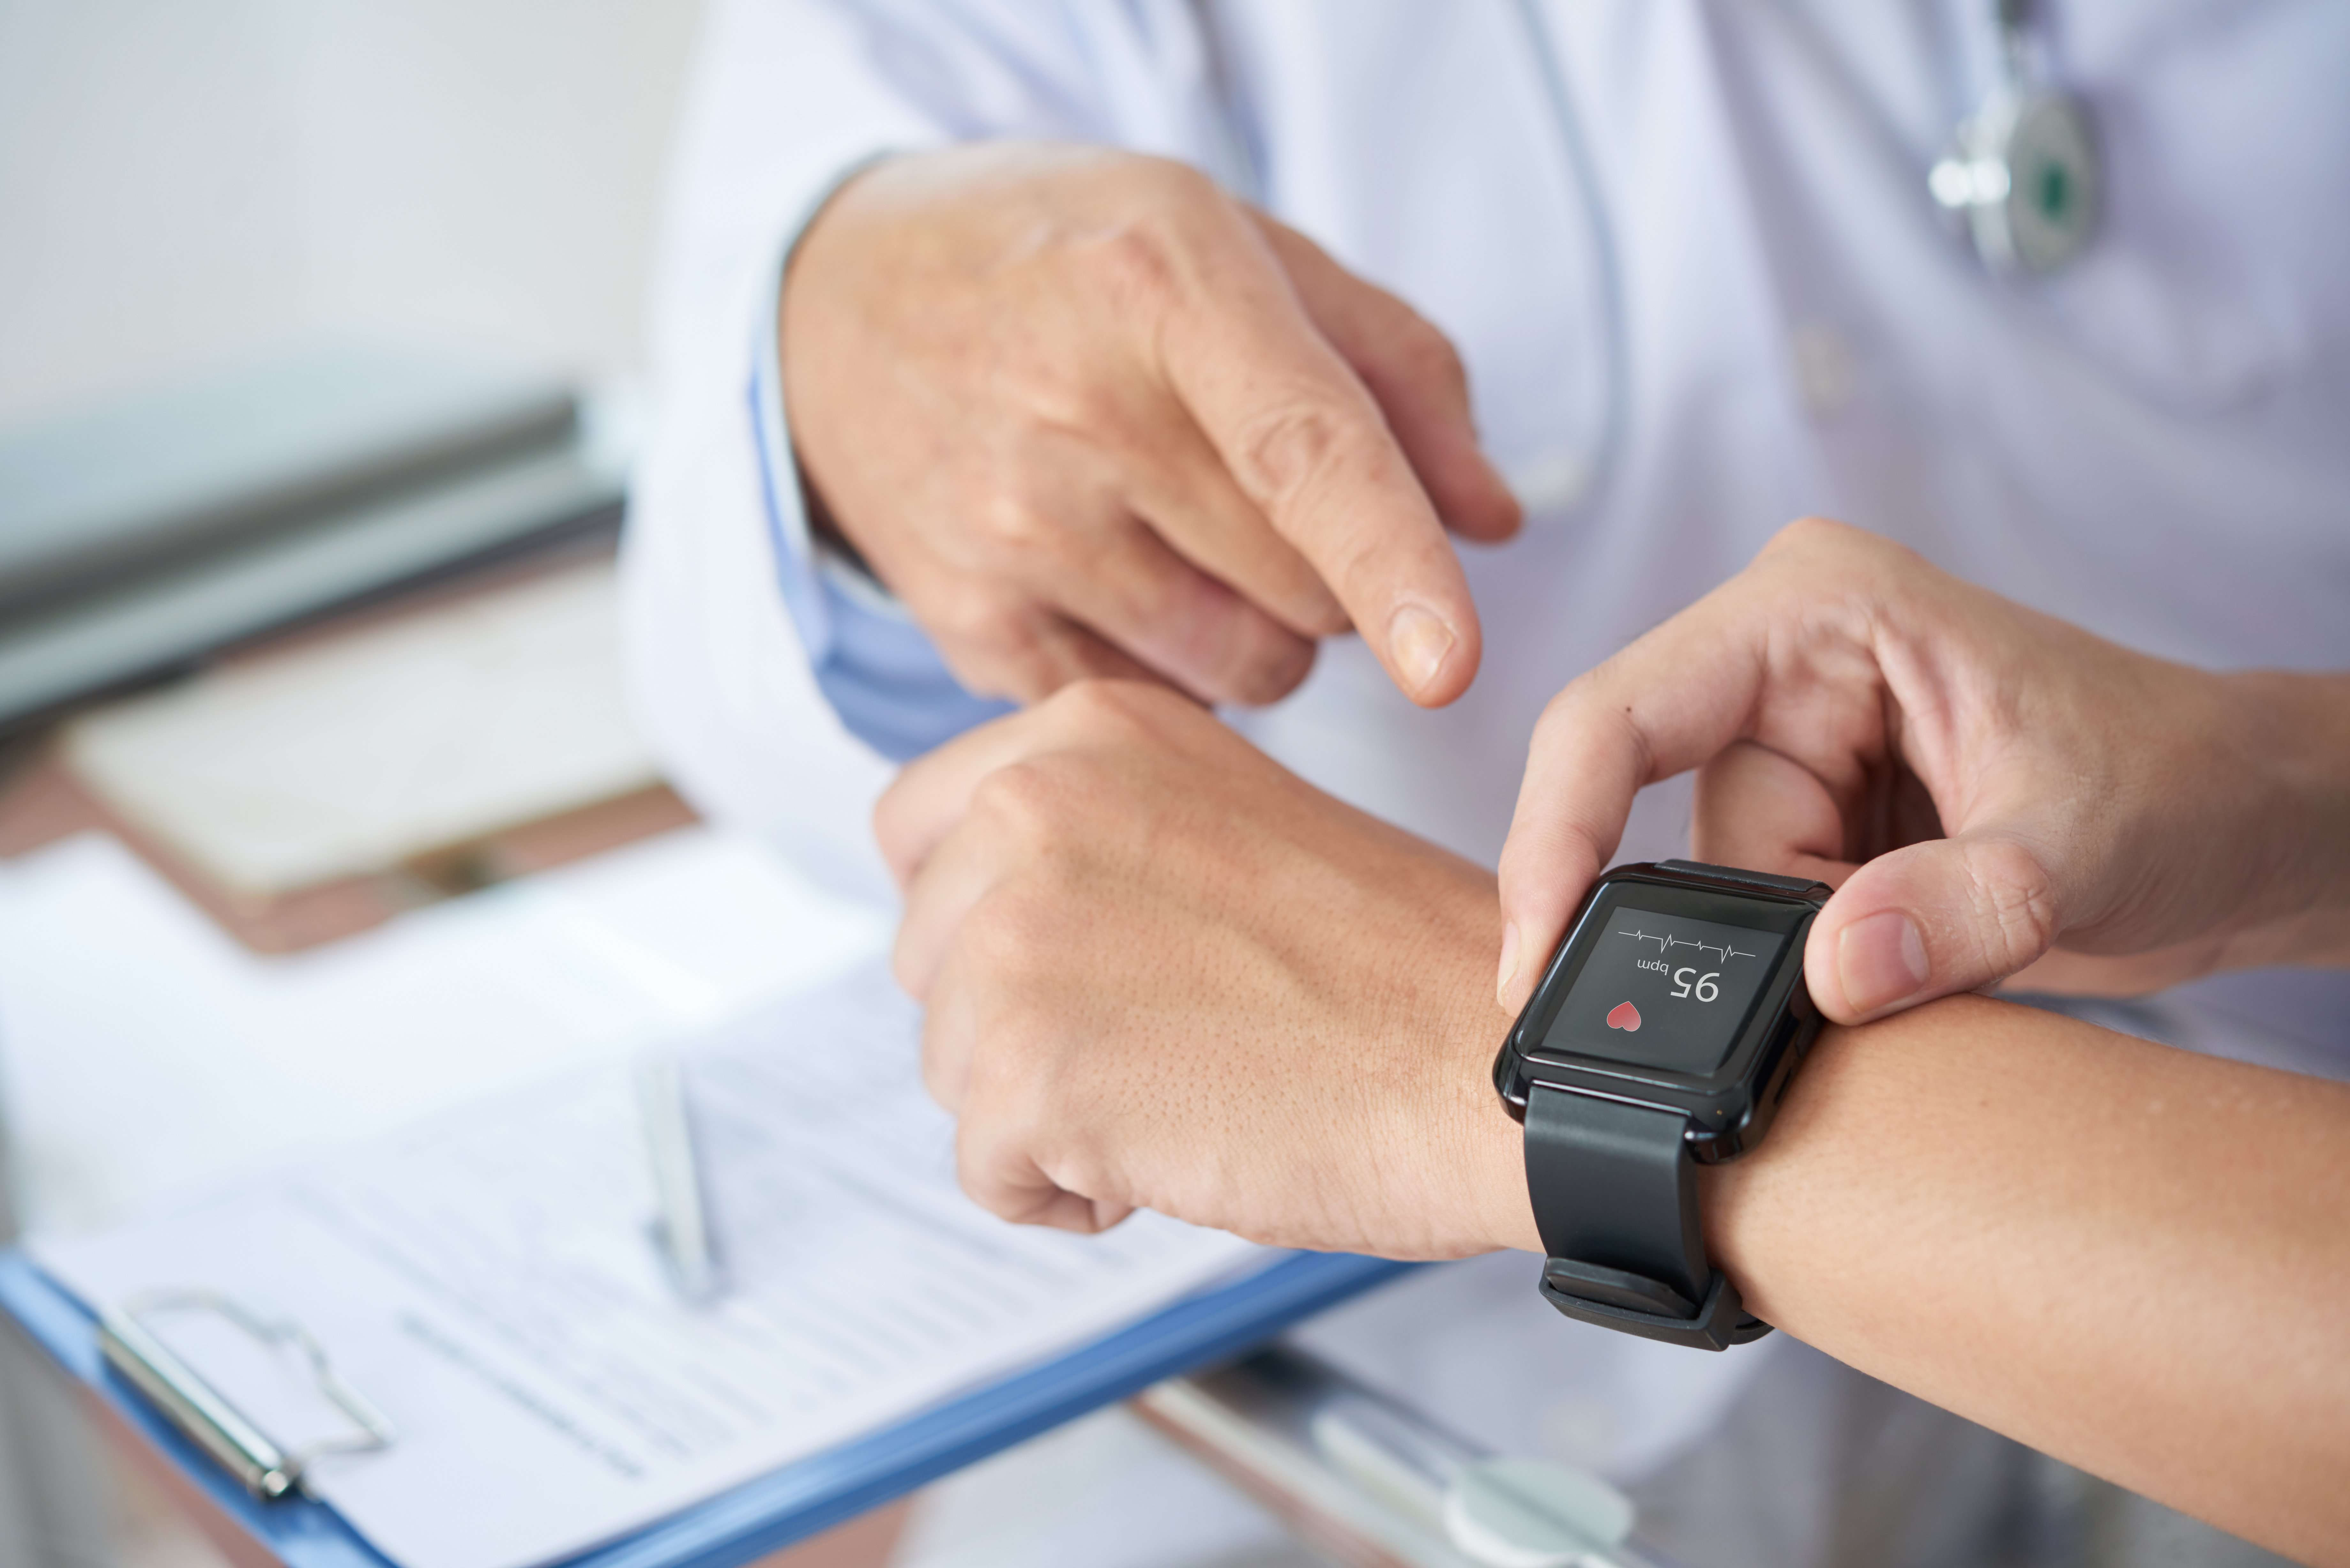 Patients will use health wearables to reduce trips to the doctor: survey